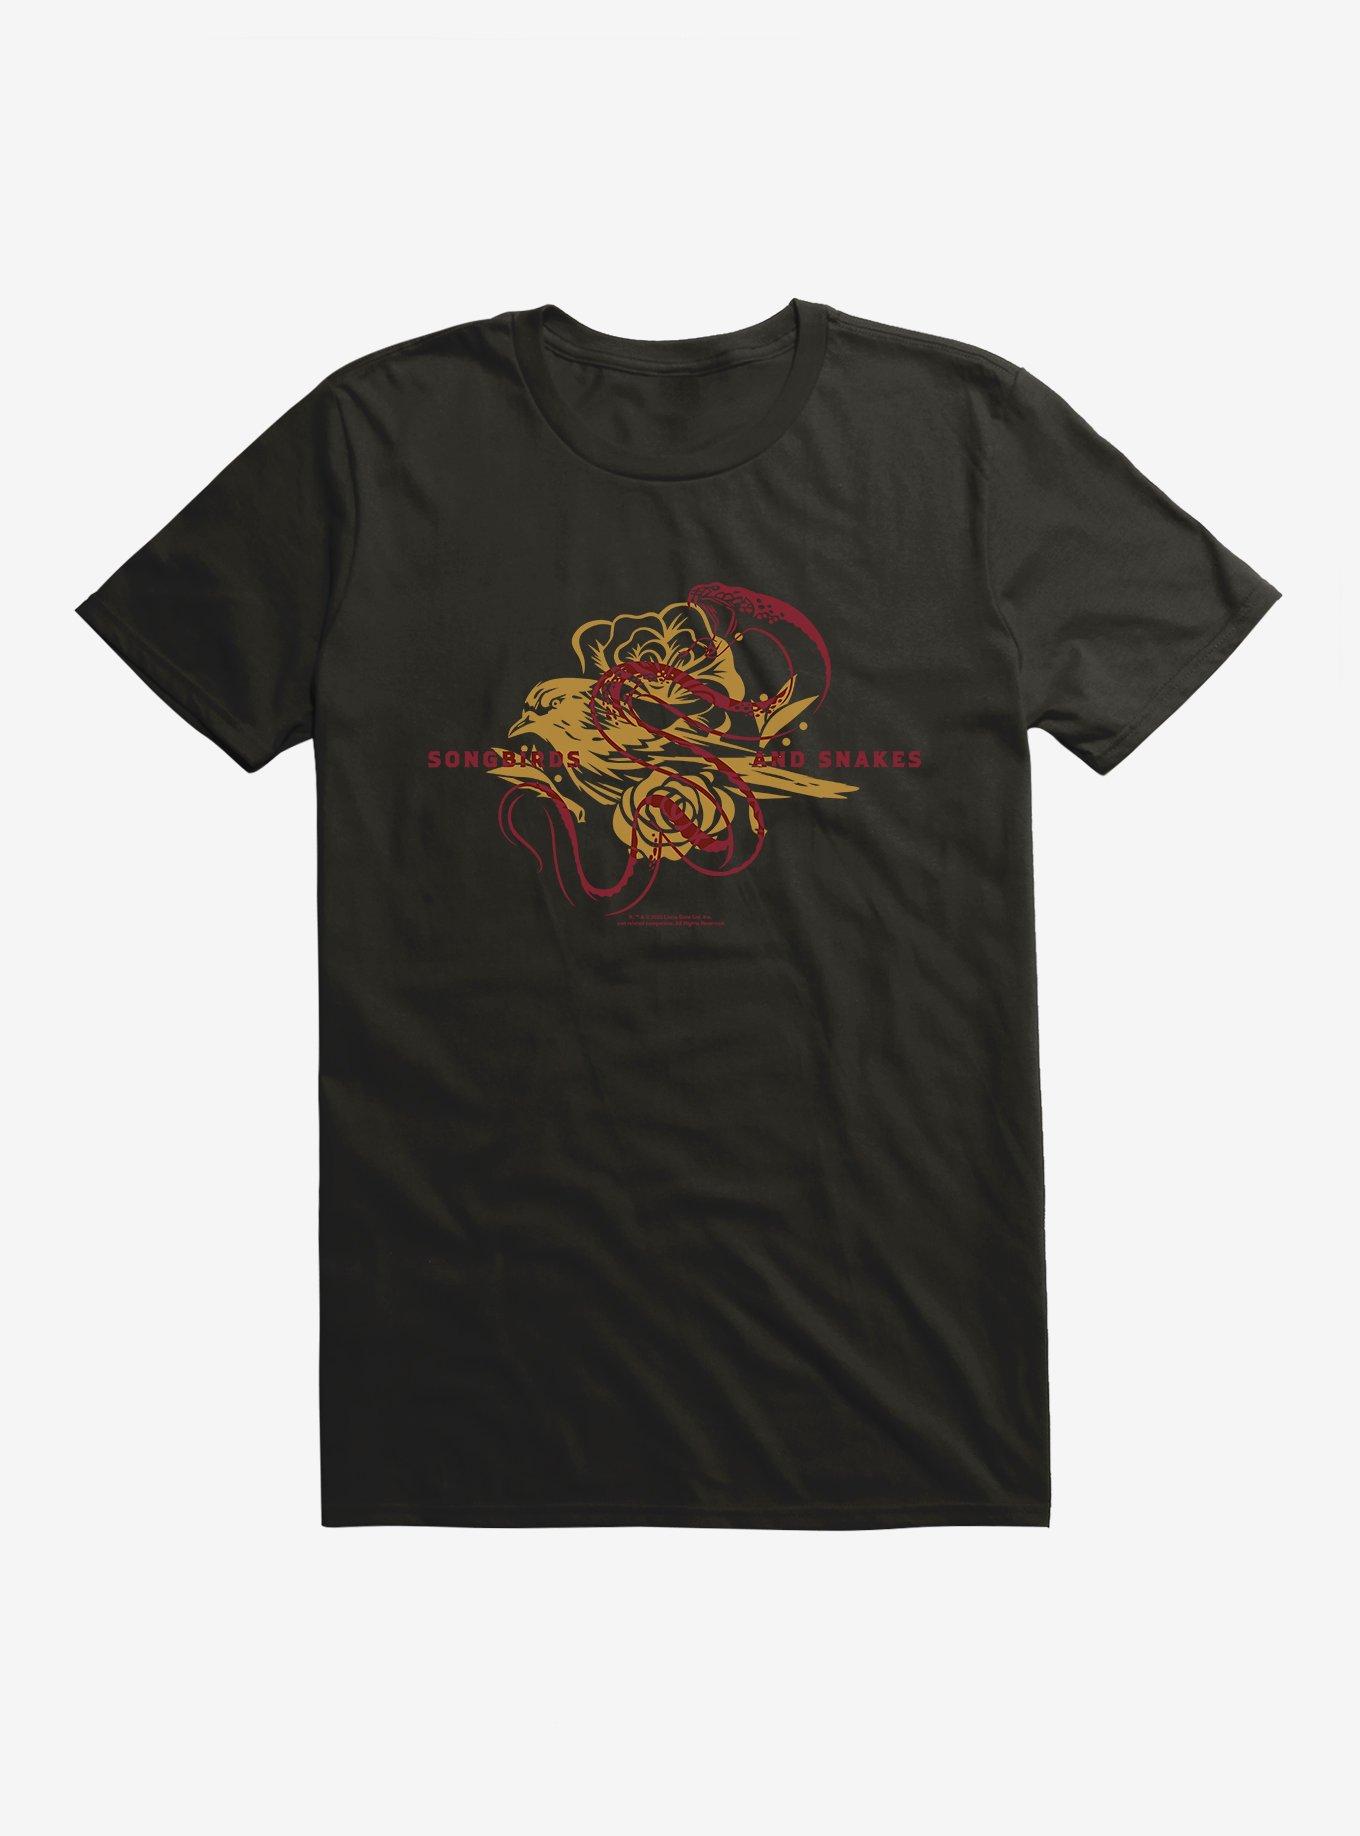 Hunger Games: The Ballad Of Songbirds And Snakes Songbrids Logo T-Shirt